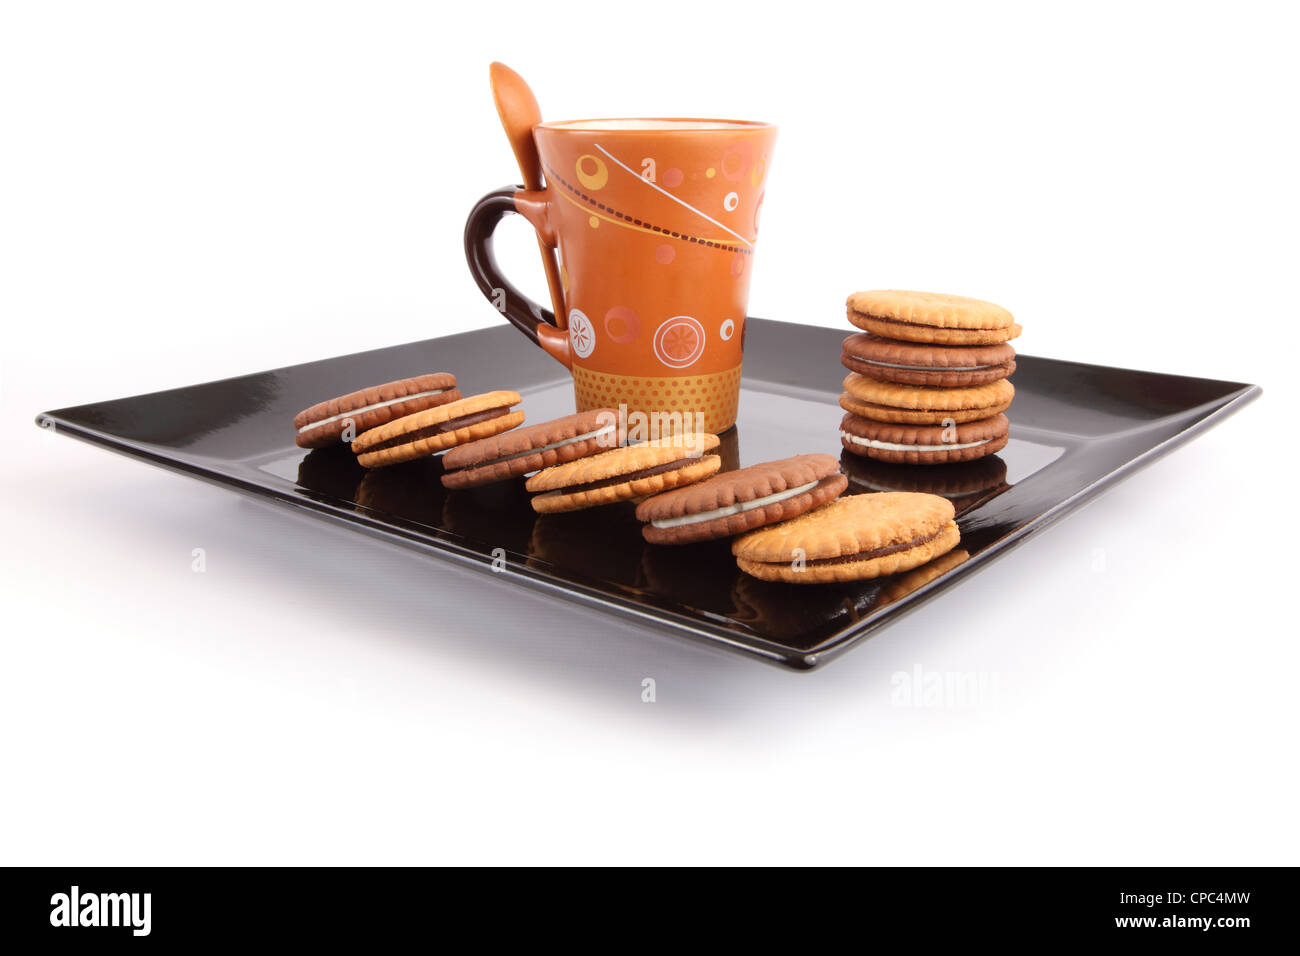 Cup of tea with biscuits on black Dish, breakfast Stock Photo